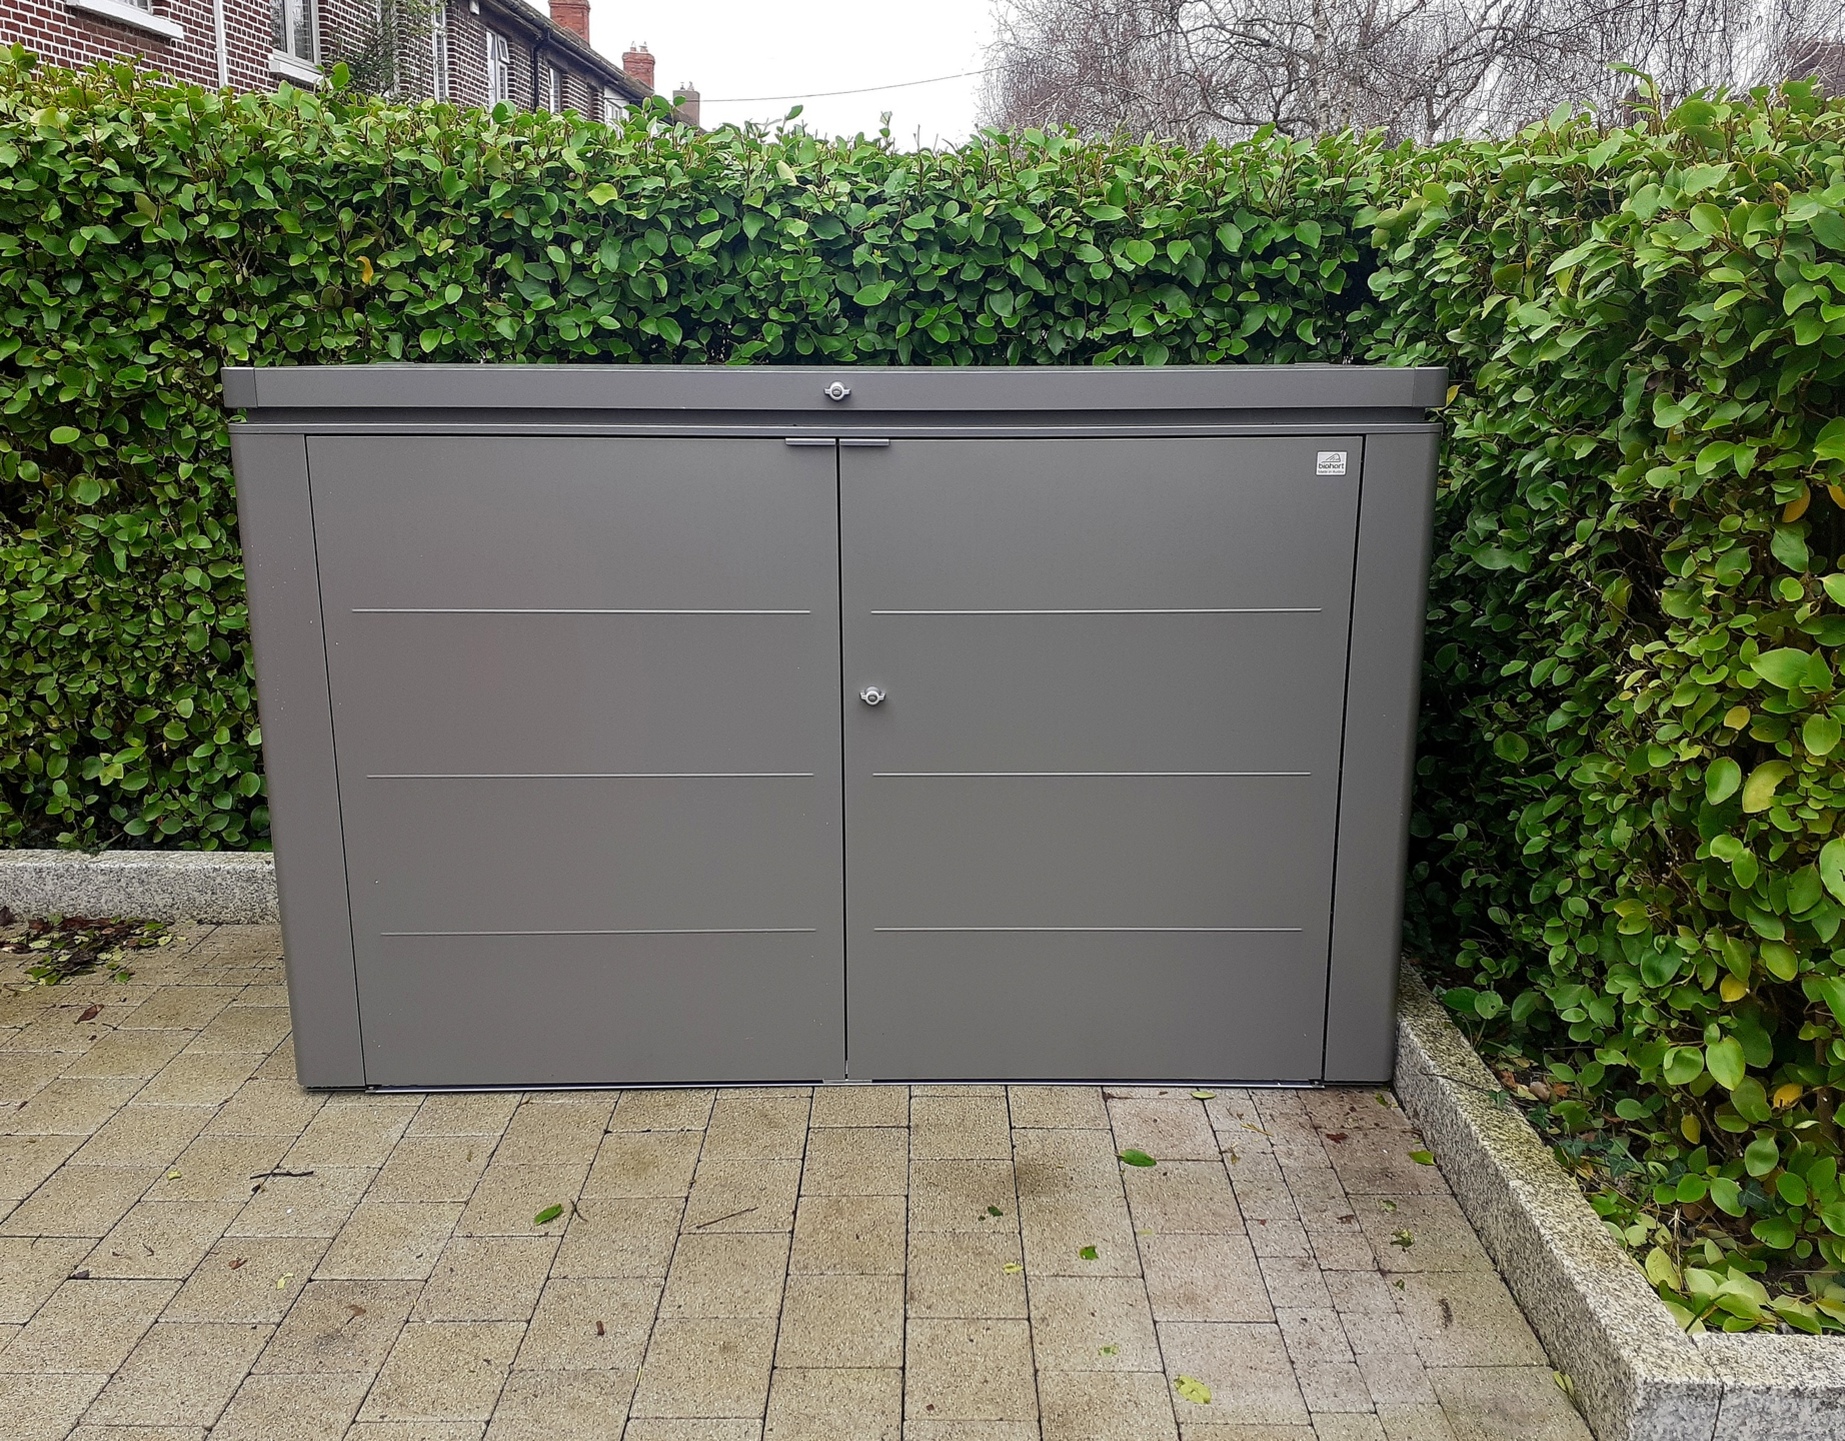 Biohort HighBoard 200 - exceptional quality, blending functionality, durability and sleek design to create stylish, secure & weatherproof bike storage solution  |  Supplied + Fitted in Killester, Dublin 5 by Owen Chubb Landscapers - Ireland's premier Biohort Supplier & Installer.